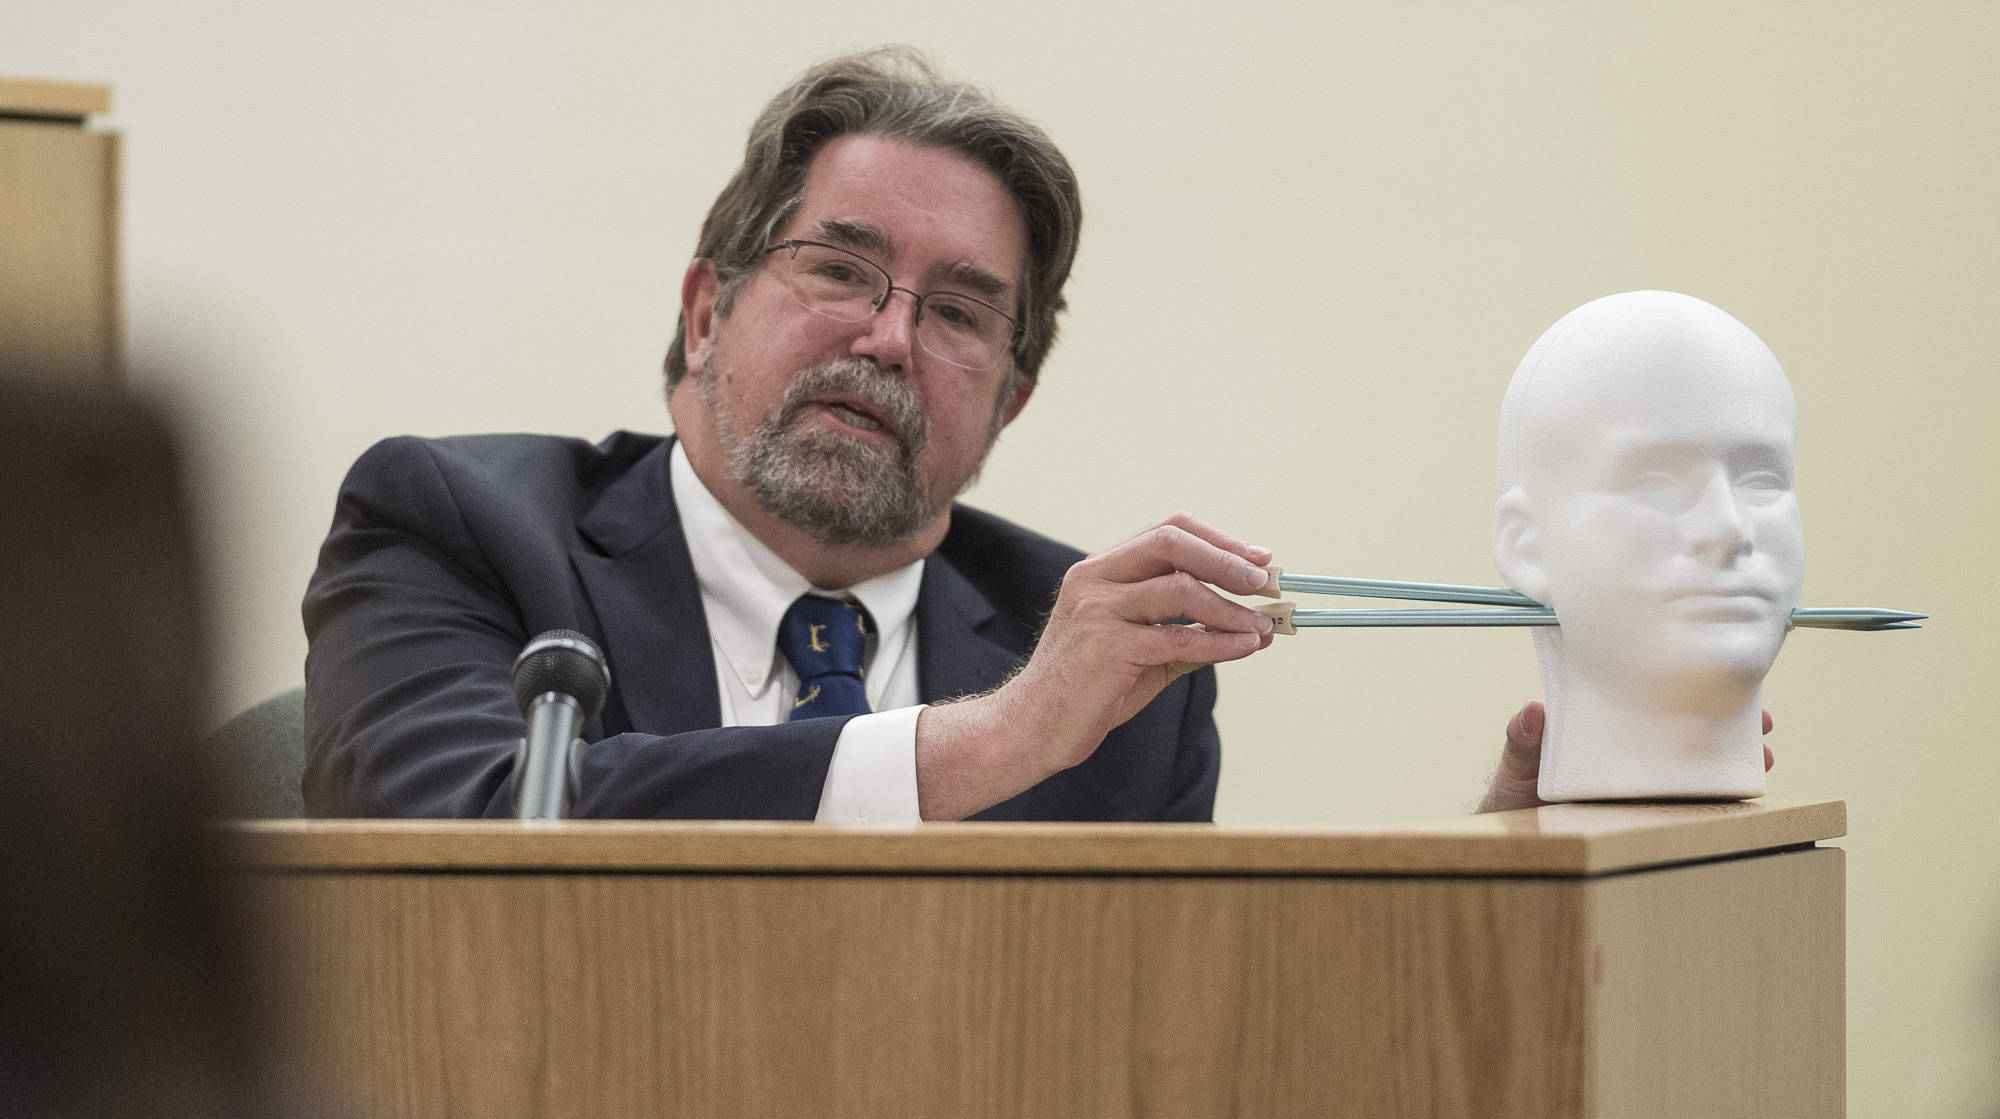 Dr. Todd Grey, a retired medical examiner, testifies to the possible path of the bullet wounds in the trial of Mark De Simone in Juneau Superior Court on Monday, May 6, 2018. De Simone is accused of killing Duilio Antonio “Tony” Rosales during a hunting trip in Excursion Inlet in 2016. (Michael Penn | Juneau Empire)